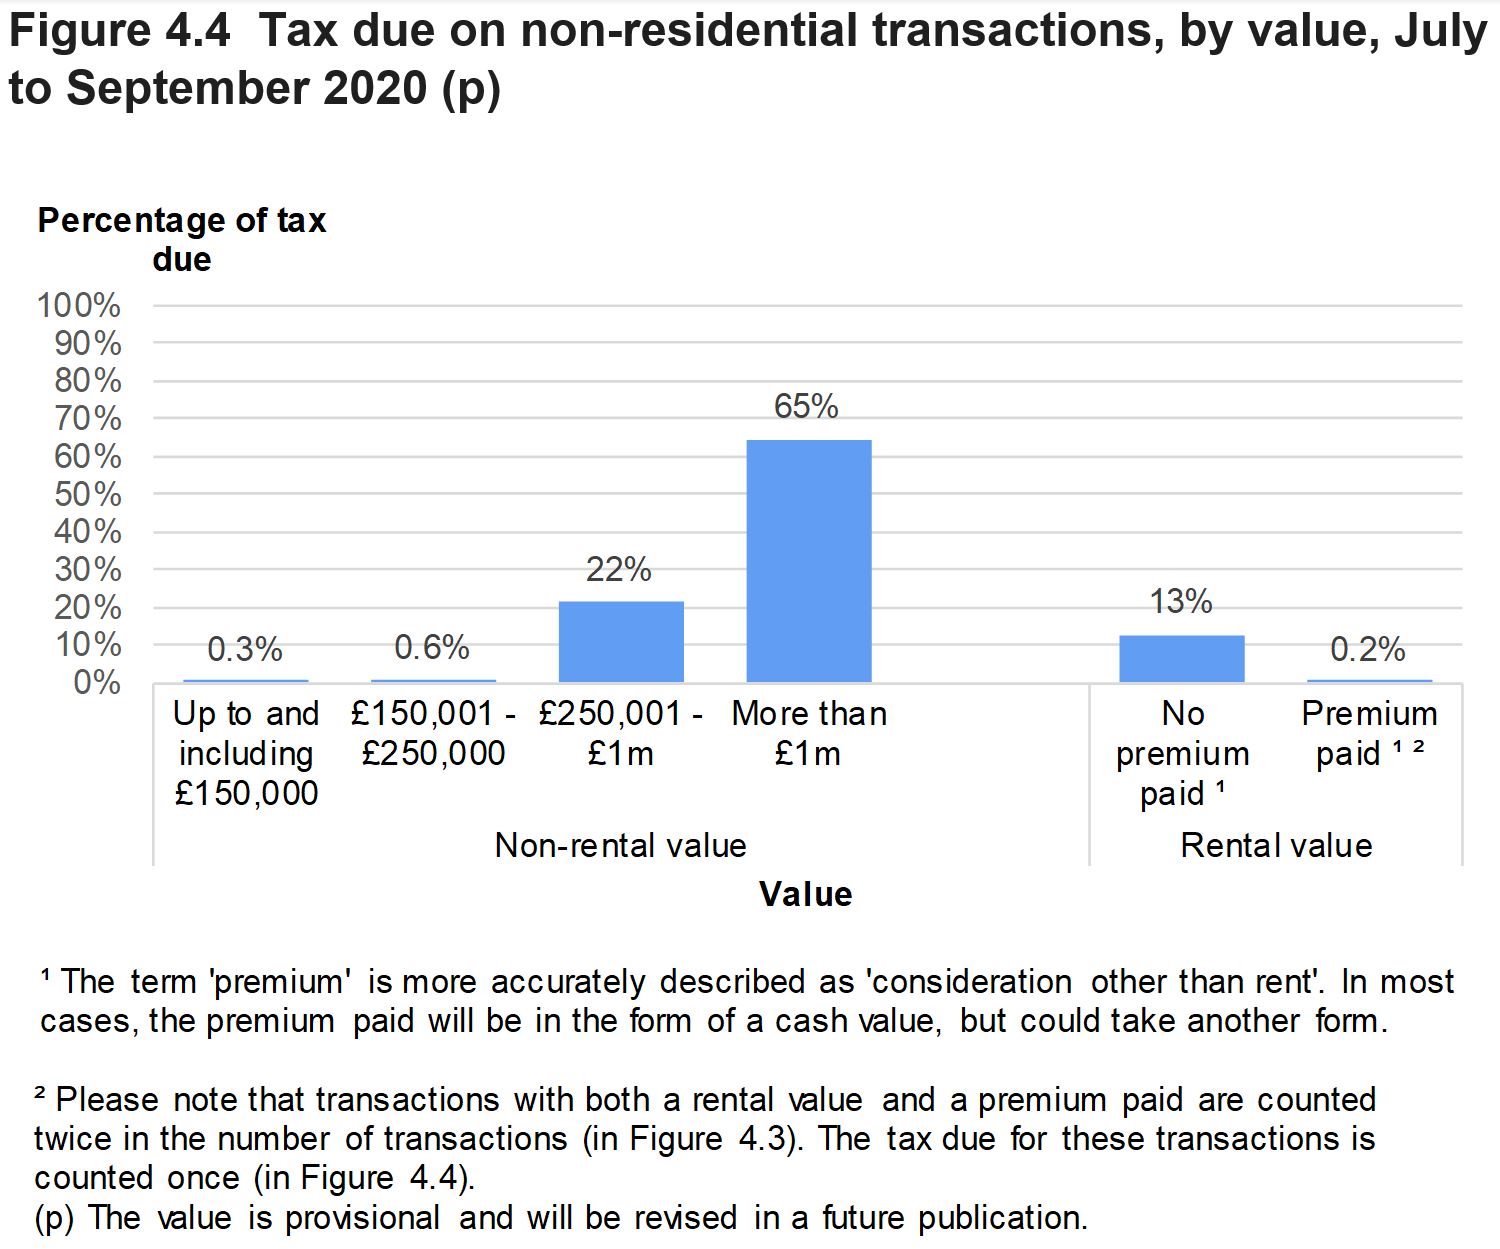 Figure 4.4 shows the amount of tax due on non-residential transactions, by value of the property. Data is presented as the percentage of transactions and relates to transactions effective in July to September 2020.